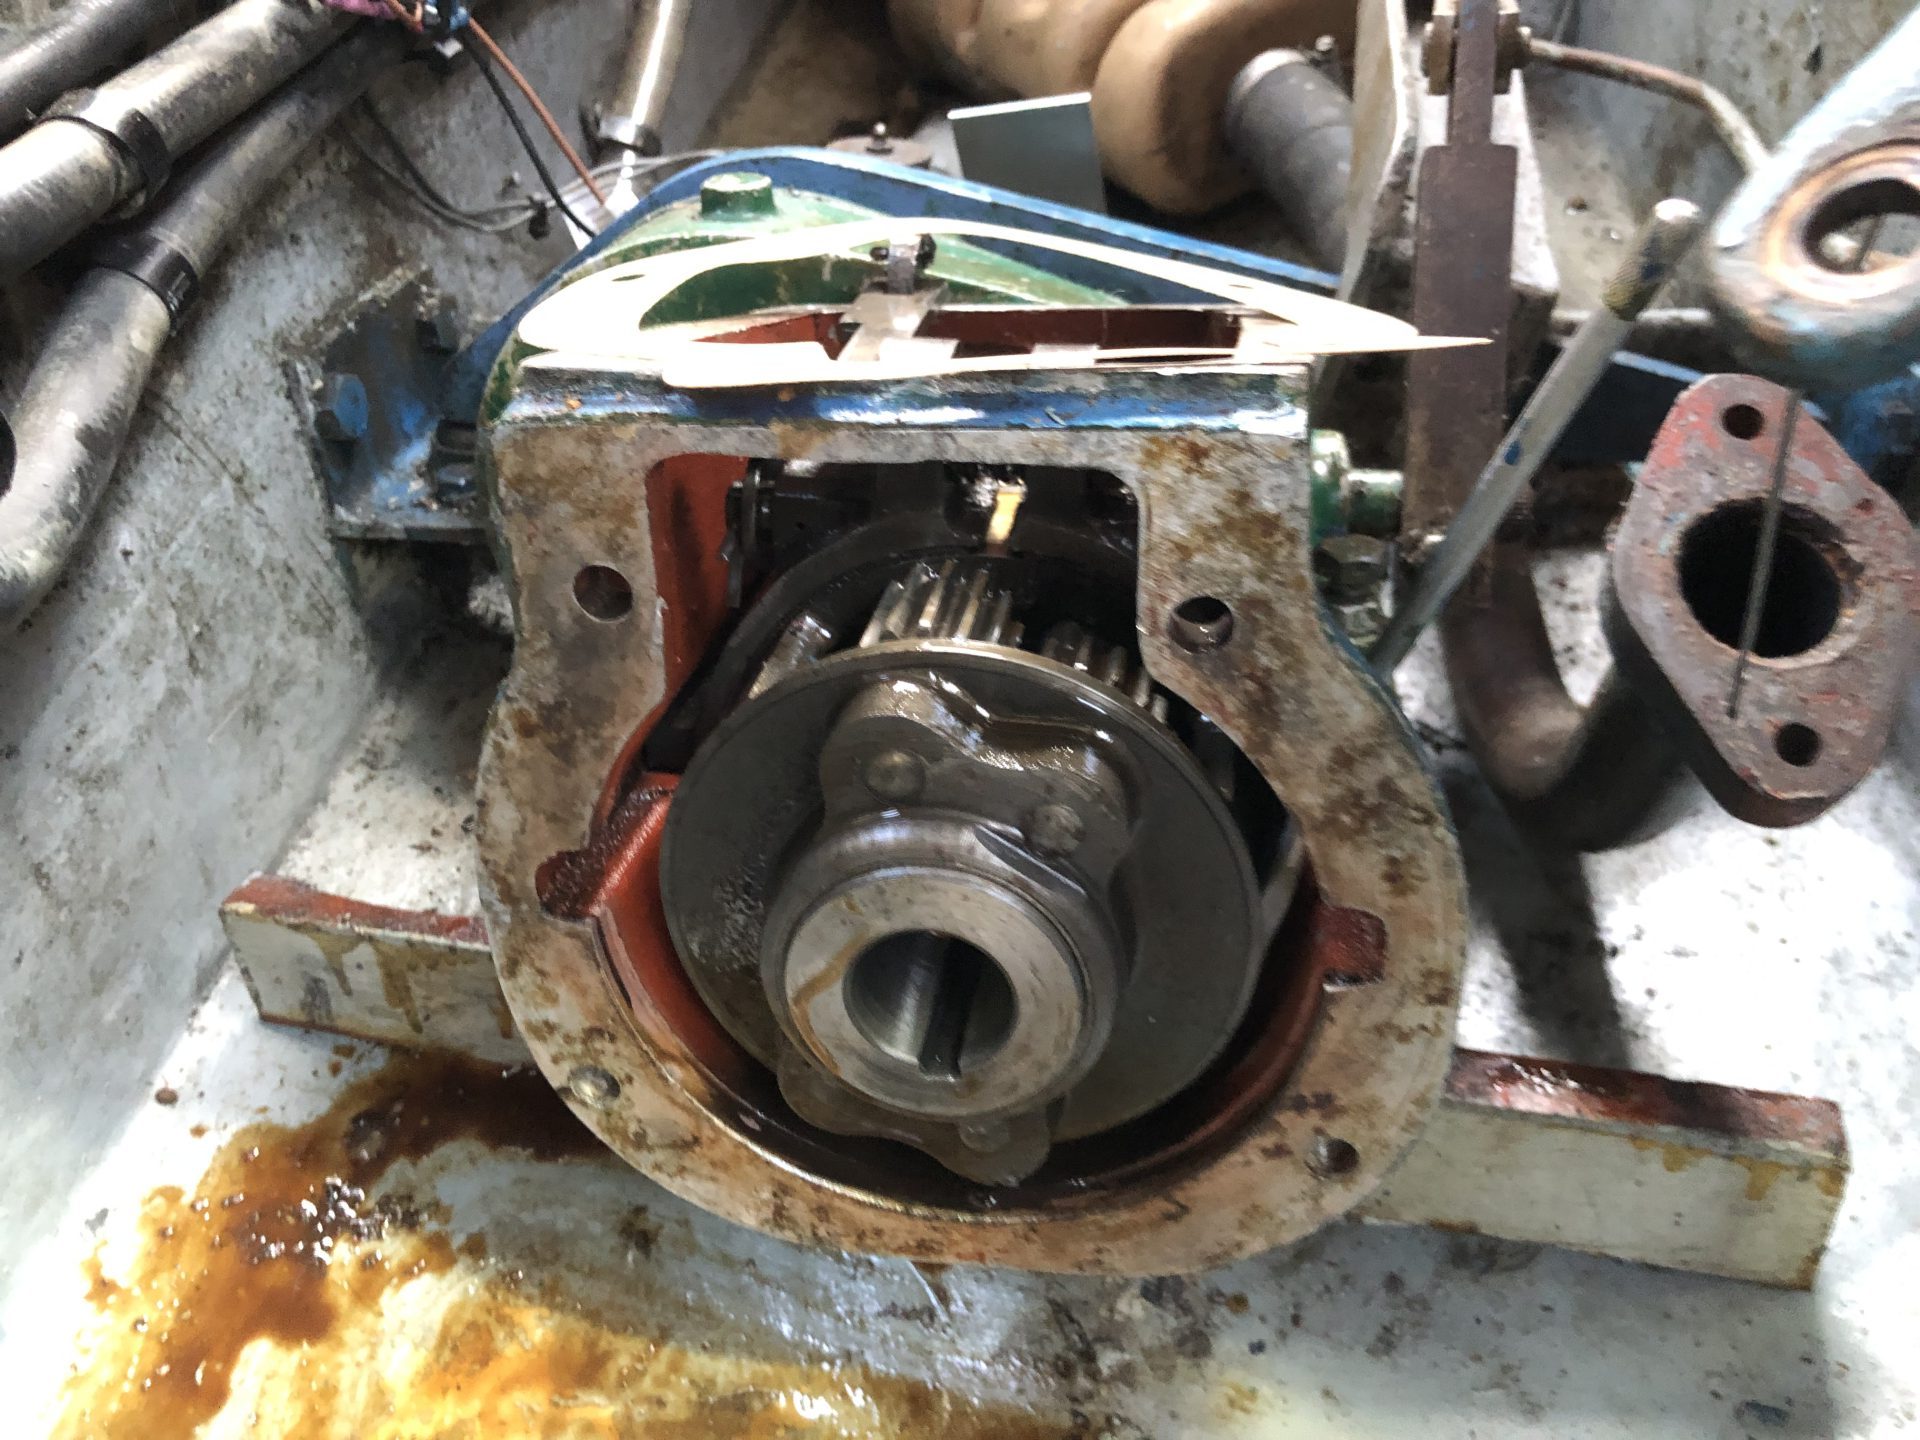 Cog section of the stub shaft inserted into the gearbox having removed the bell housing